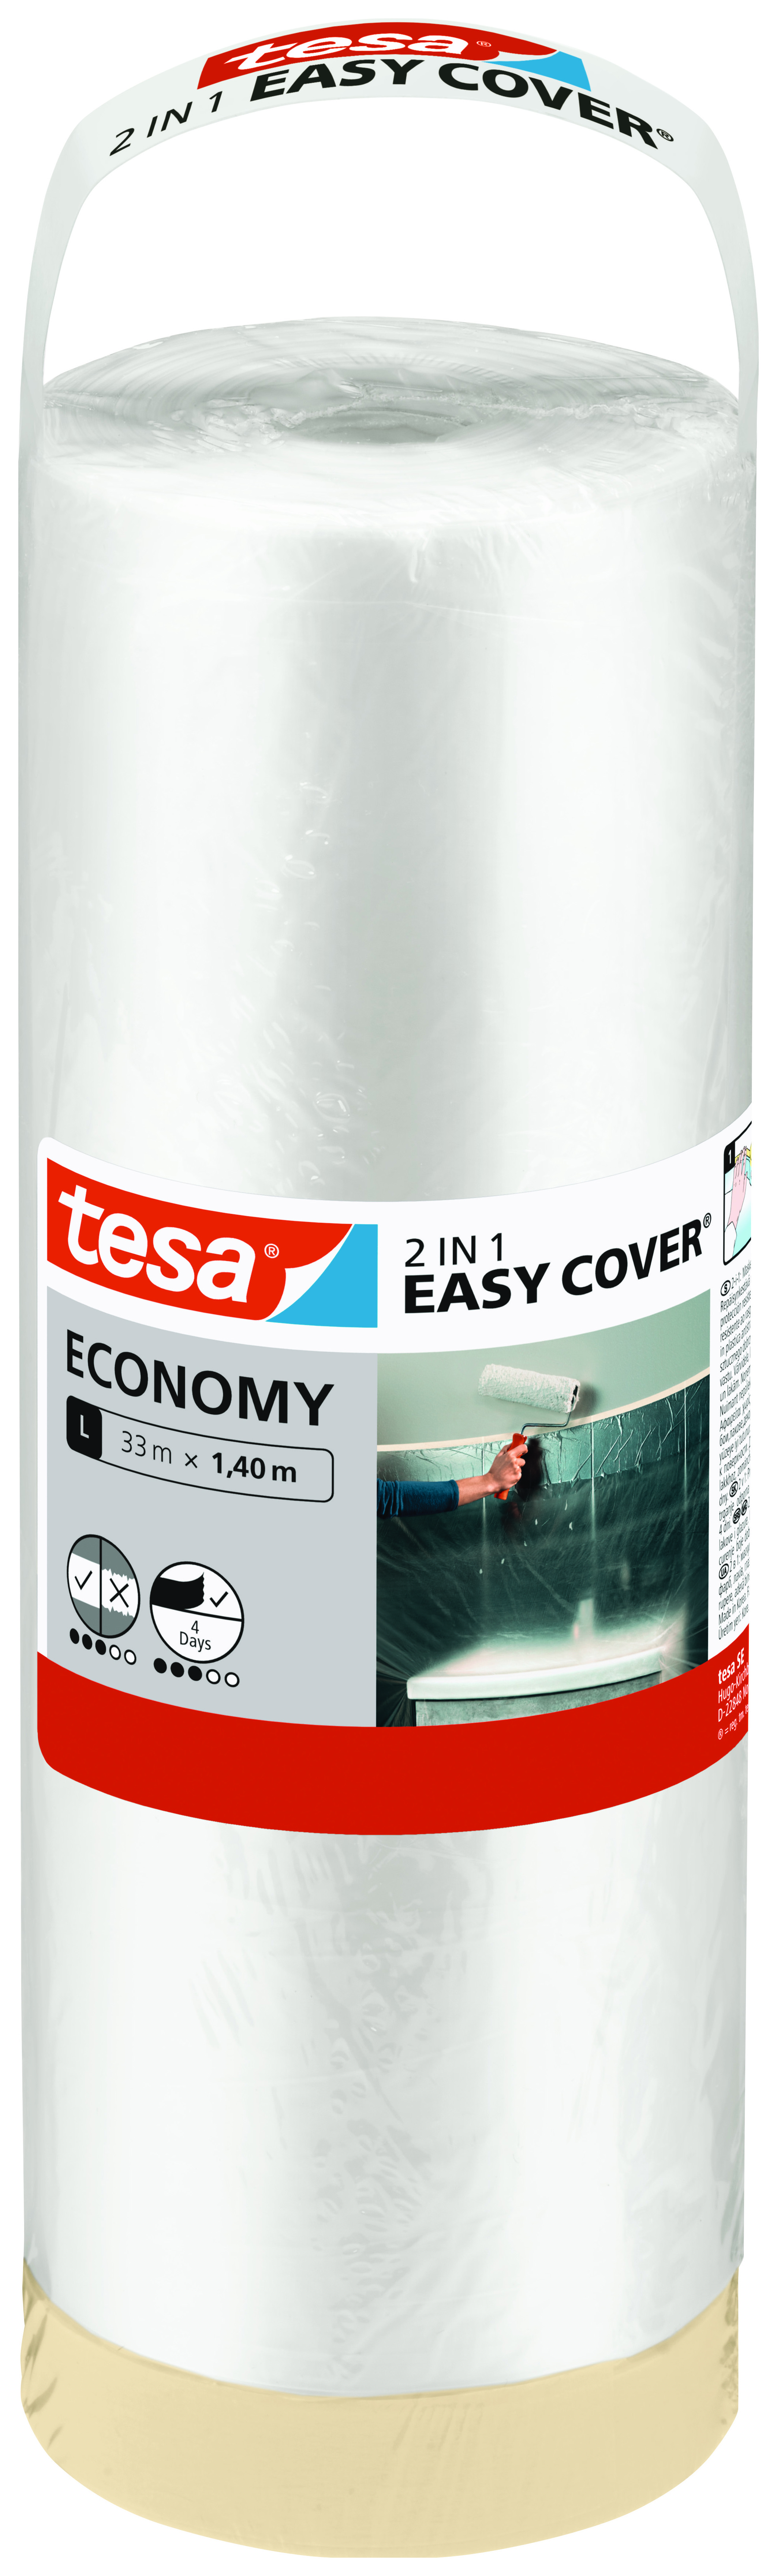 Image of Tesa Easy Cover Economy L - 2 in 1 Masking Tape & Dust Sheet - 33m x 1.40m